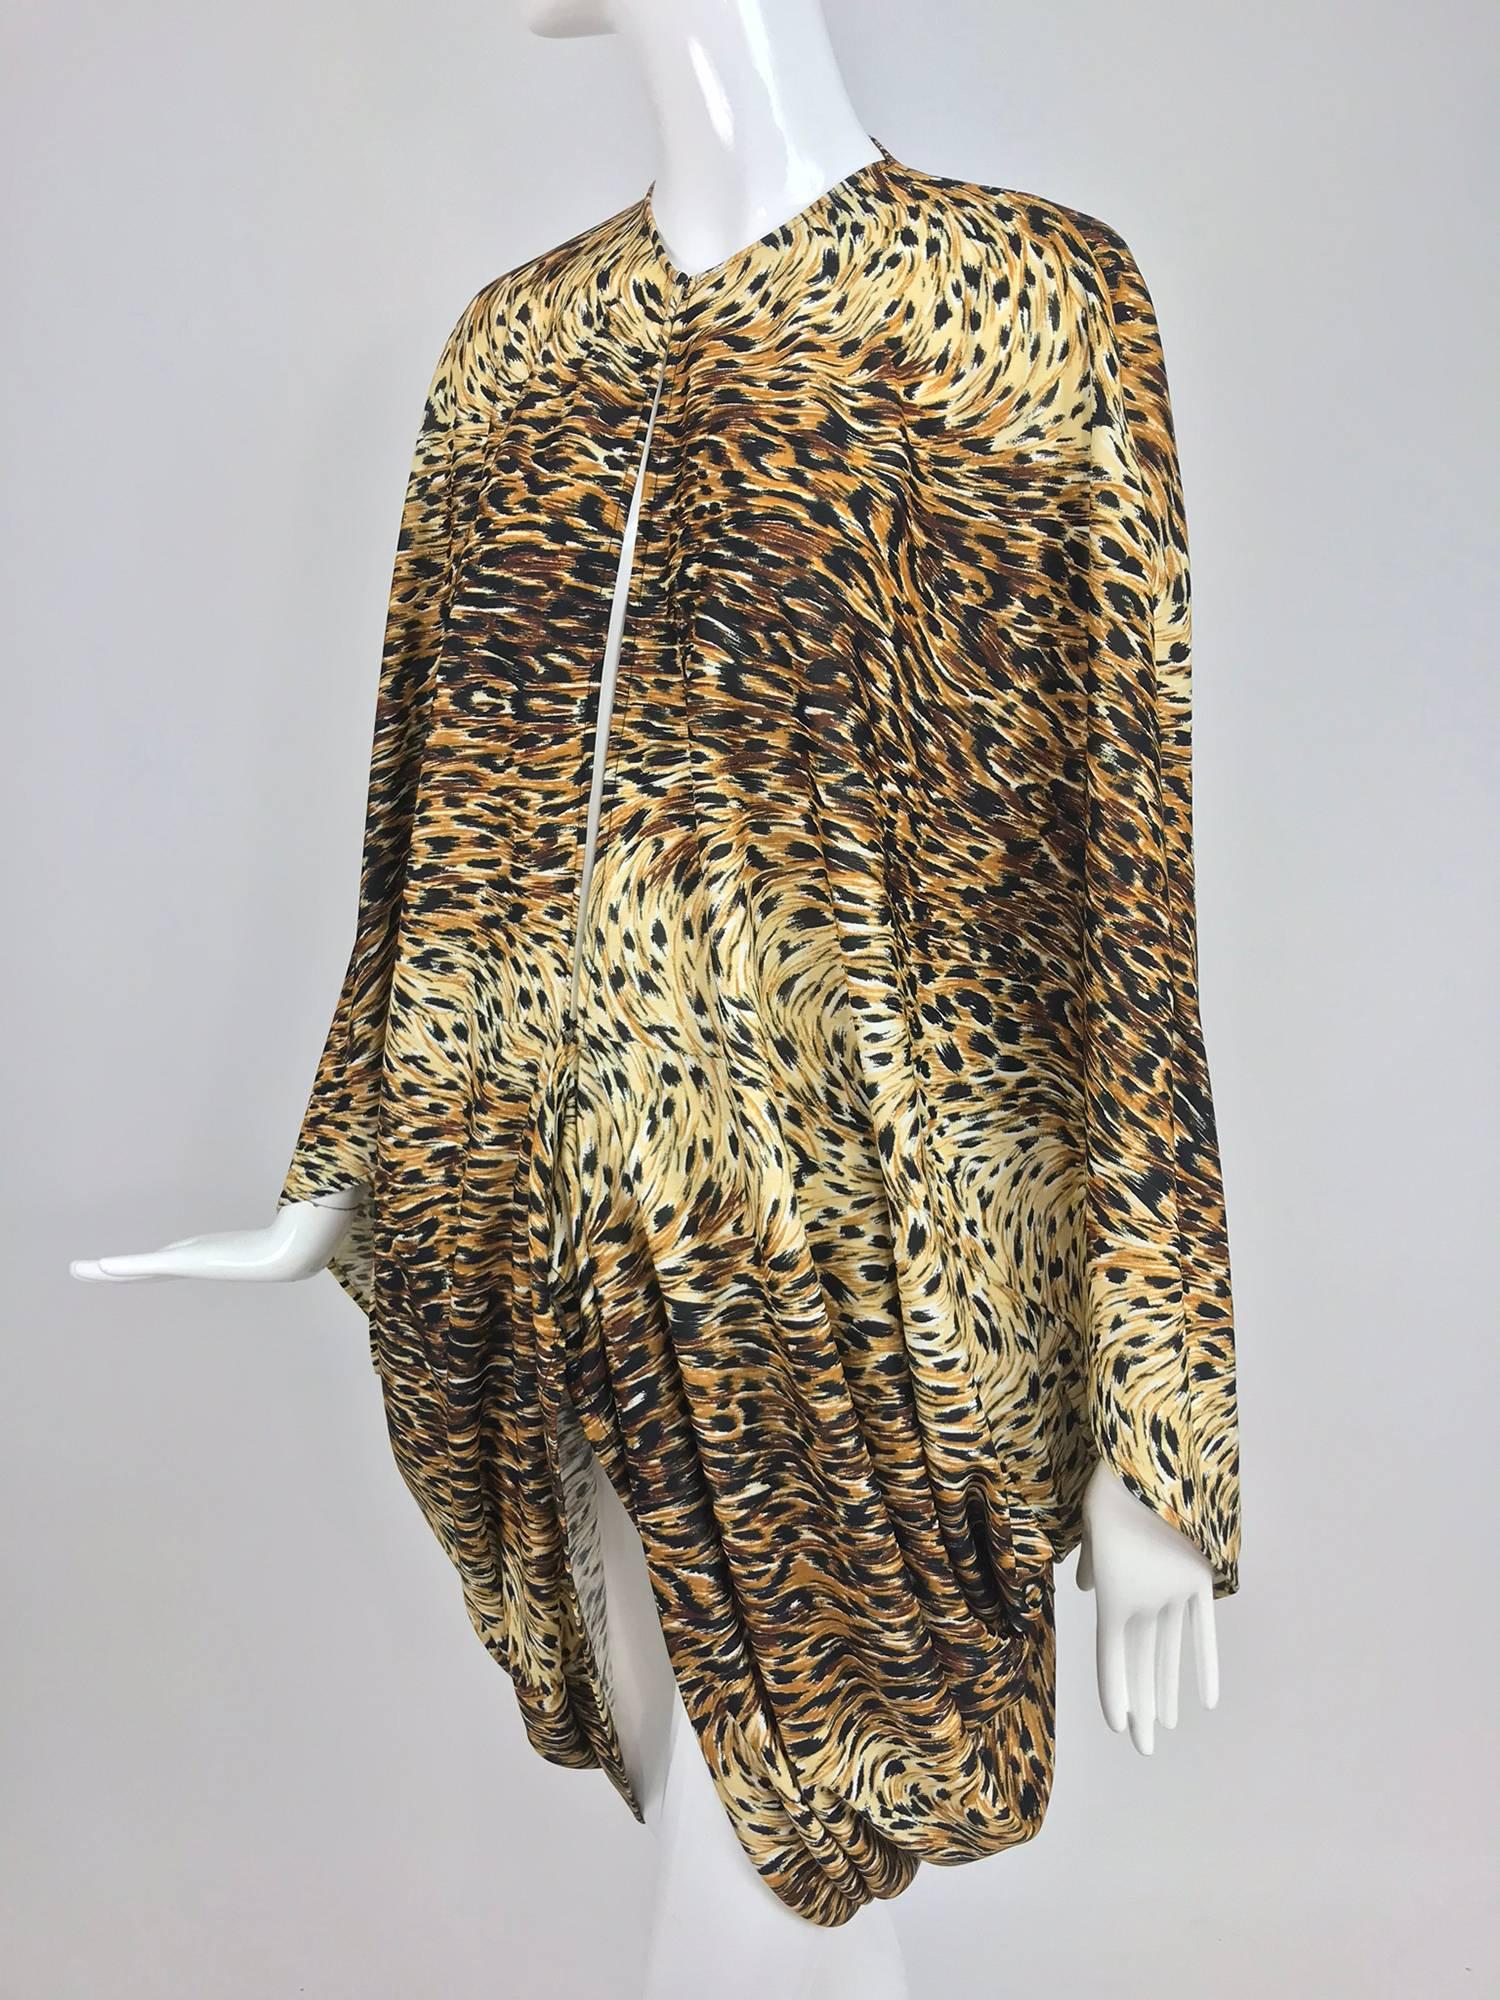 Norma Kamali OMO leopard print cocoon jacket from the 1980s. Unlined nylon/spandex jersey cocoon jacket closes at the front with a hook and eye. Draped shape with arm openings, longer at the back. Fits a size small or medium.
In excellent wearable